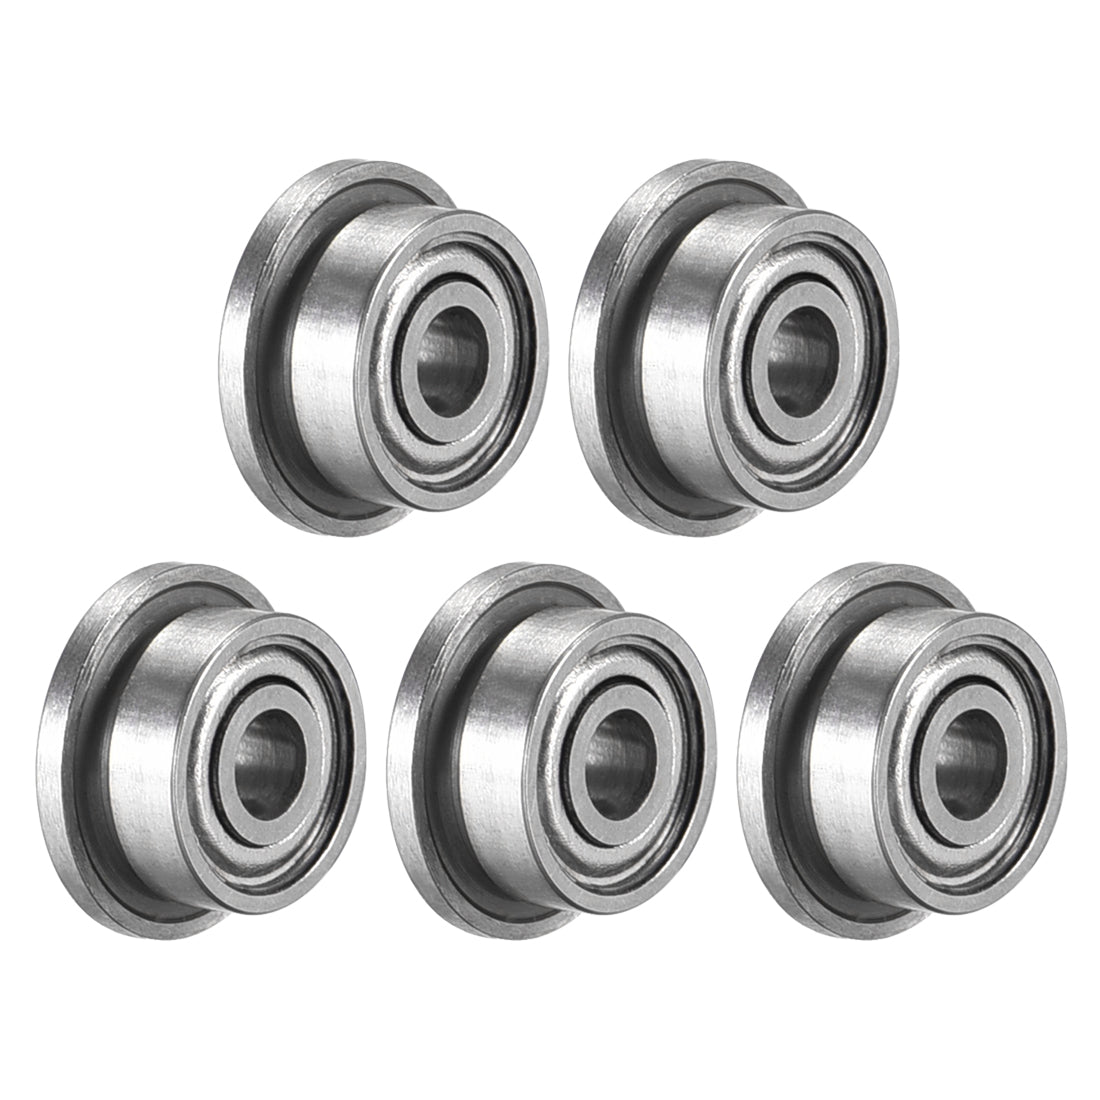 uxcell Uxcell F692ZZ Flange Ball Bearing 2x6x3mm Double Shielded Chrome Steel Bearings 5pcs